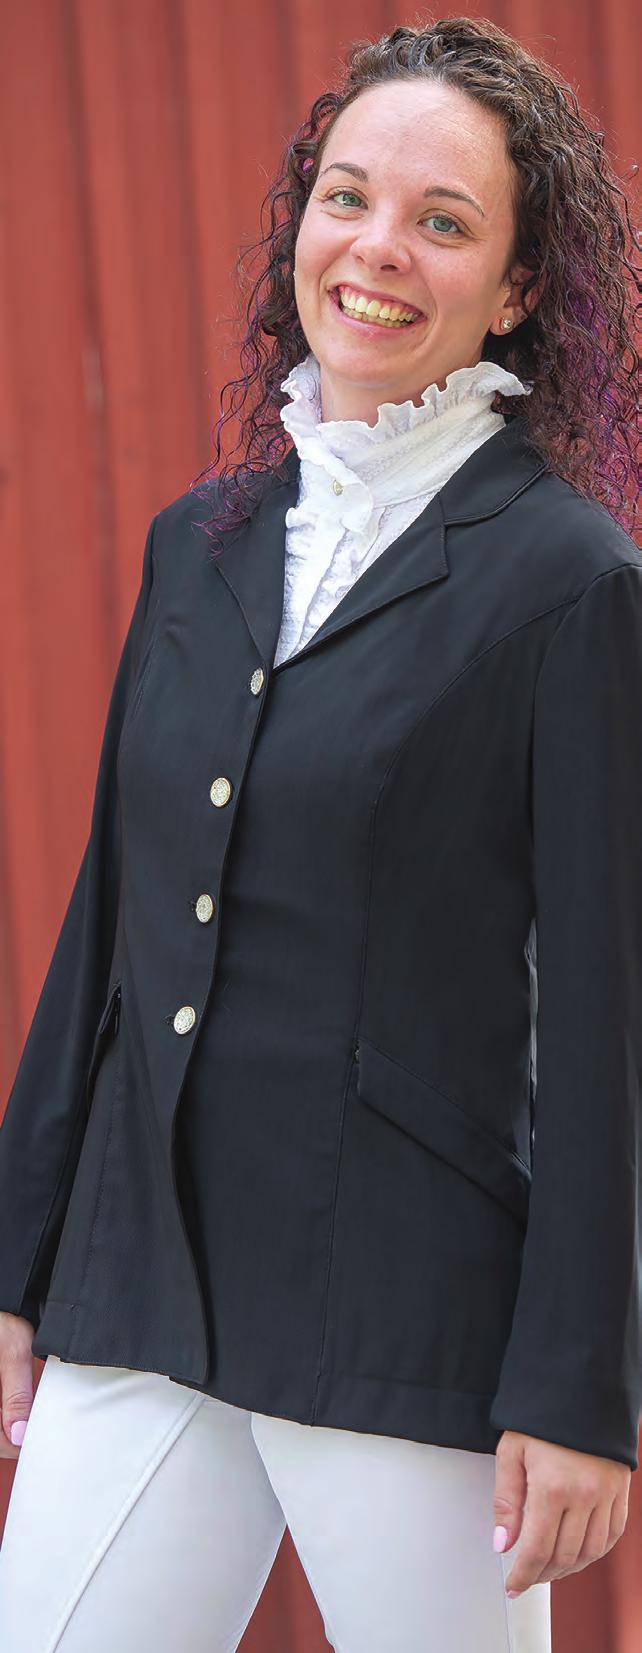 ZEPHYR SHOW COATS new! You ll stay cool, stylish, and professional in the coolest coat on the market. The black Dressage Zephyr is made from power mesh and features stunning black satin piping.